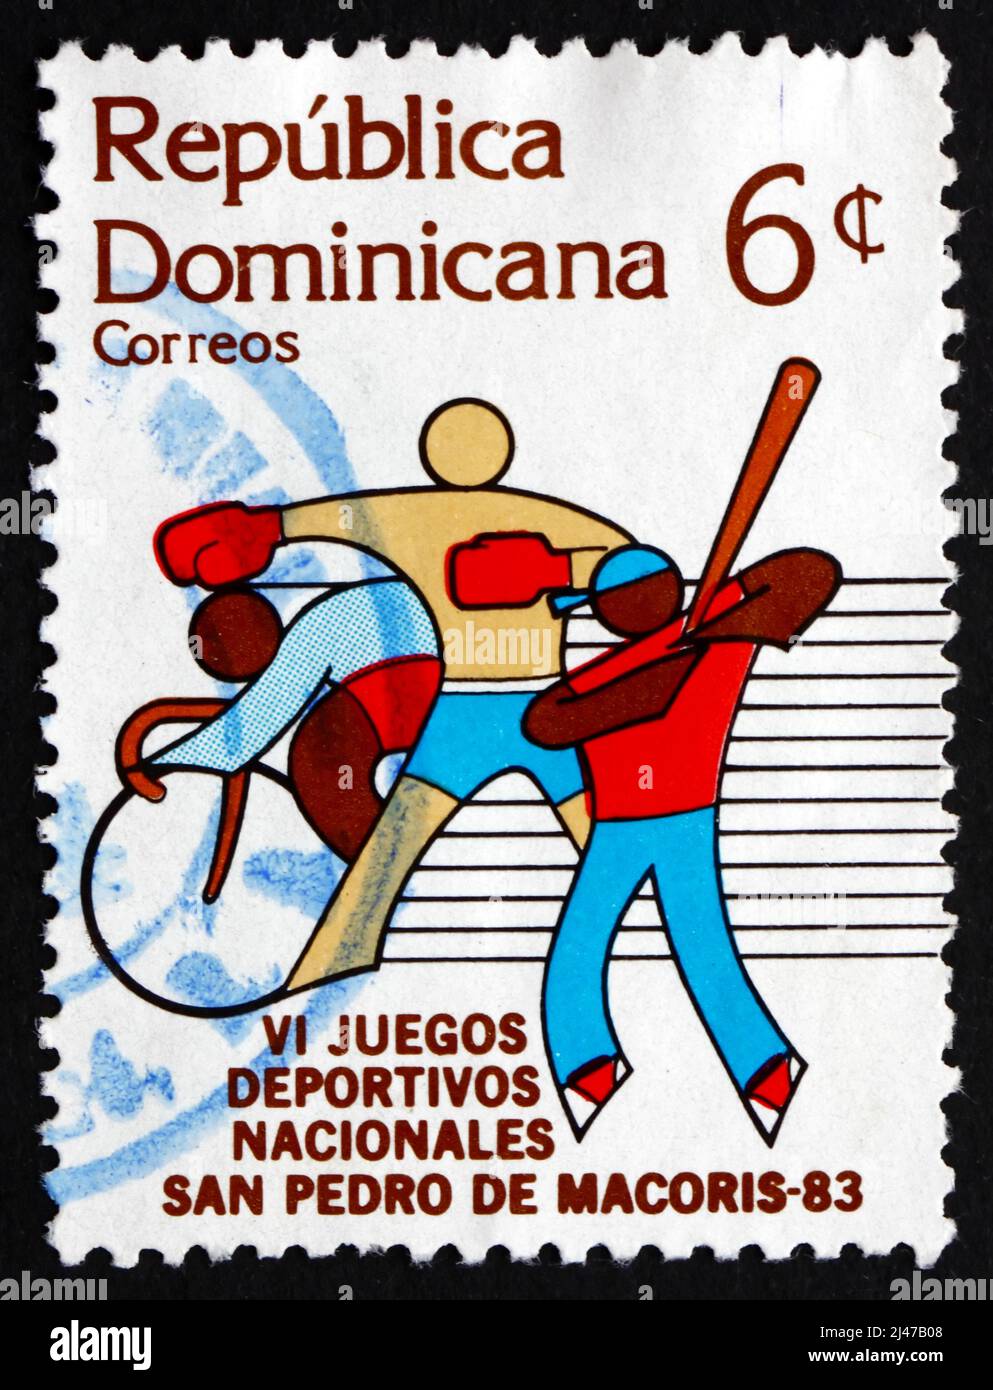 DOMINICAN REPUBLIC - CIRCA 1983: a stamp printed in Dominican Republic shows Bicycling, Boxing, Baseball, 6th National Games, circa 1983 Stock Photo